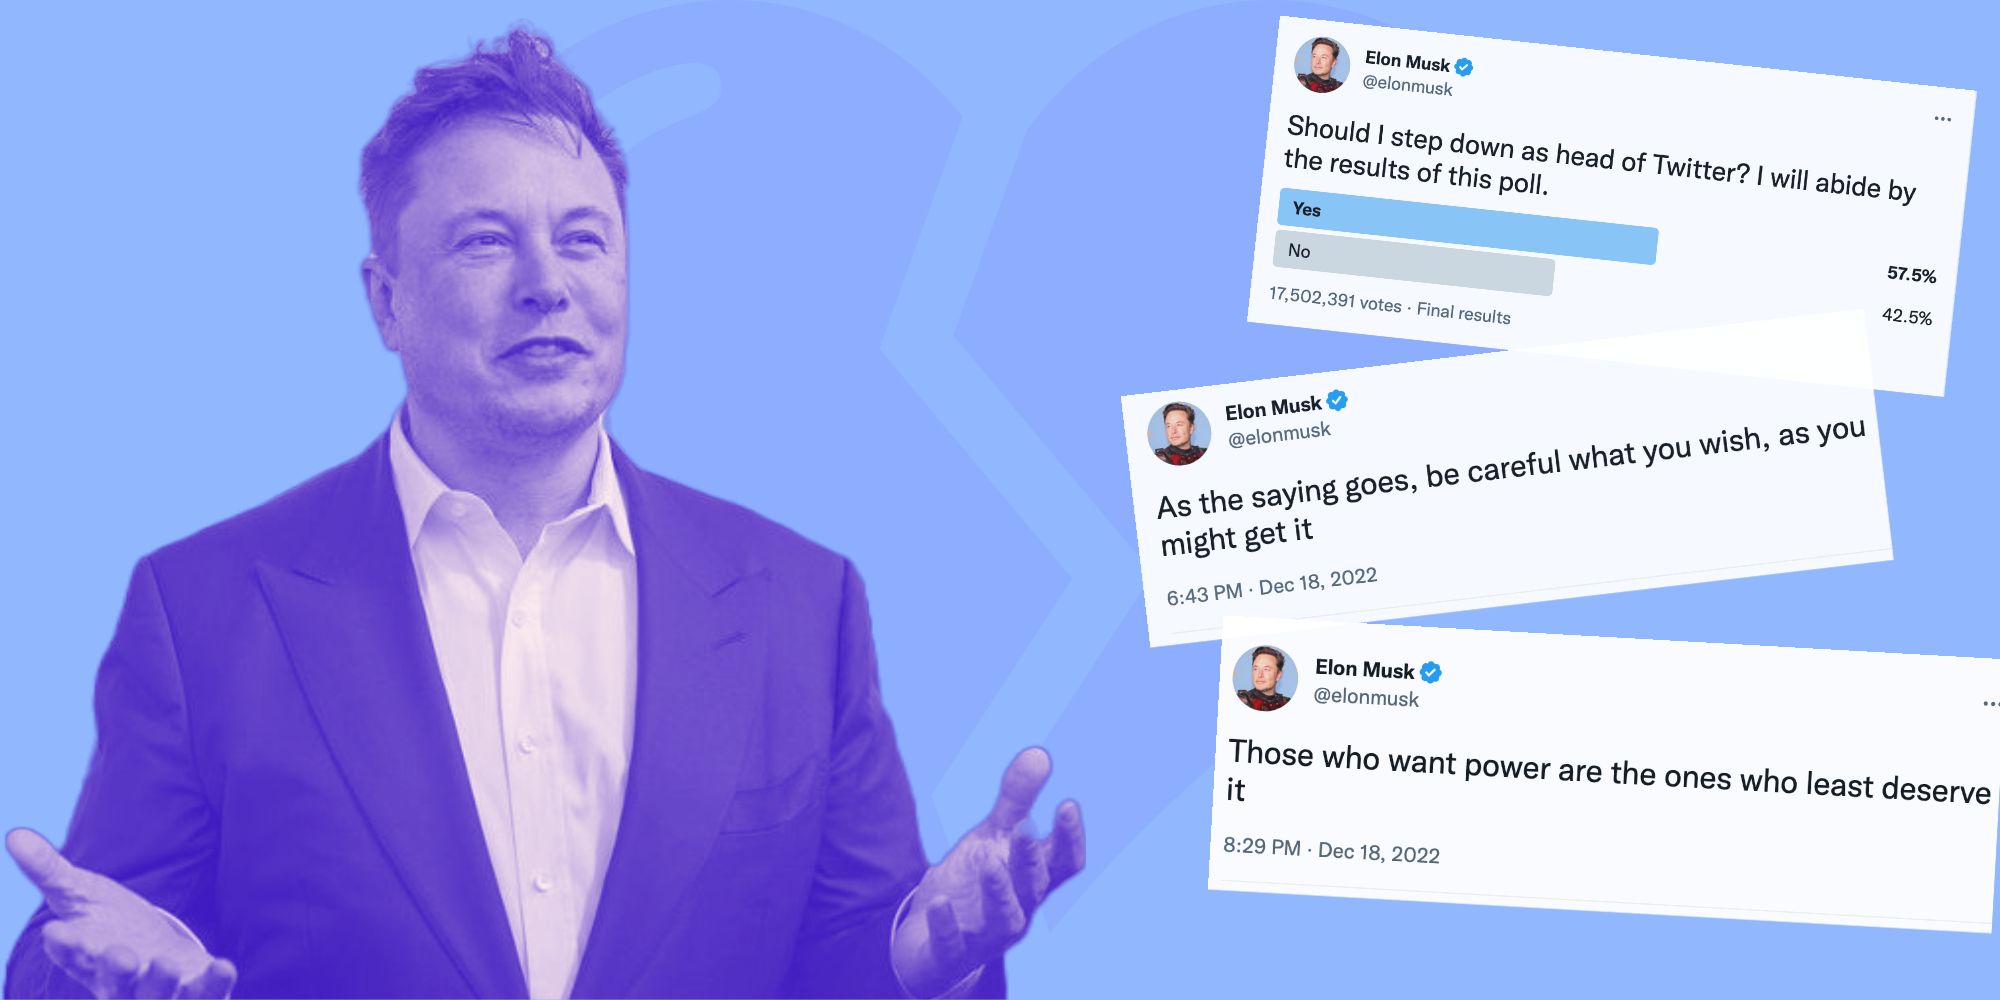 A photo of Elon Musk with his hands in front of him turned upward looking confused, with a blue tint, beside three screenshots of tweets. A broken heart emoji is shown faintly on the blue background